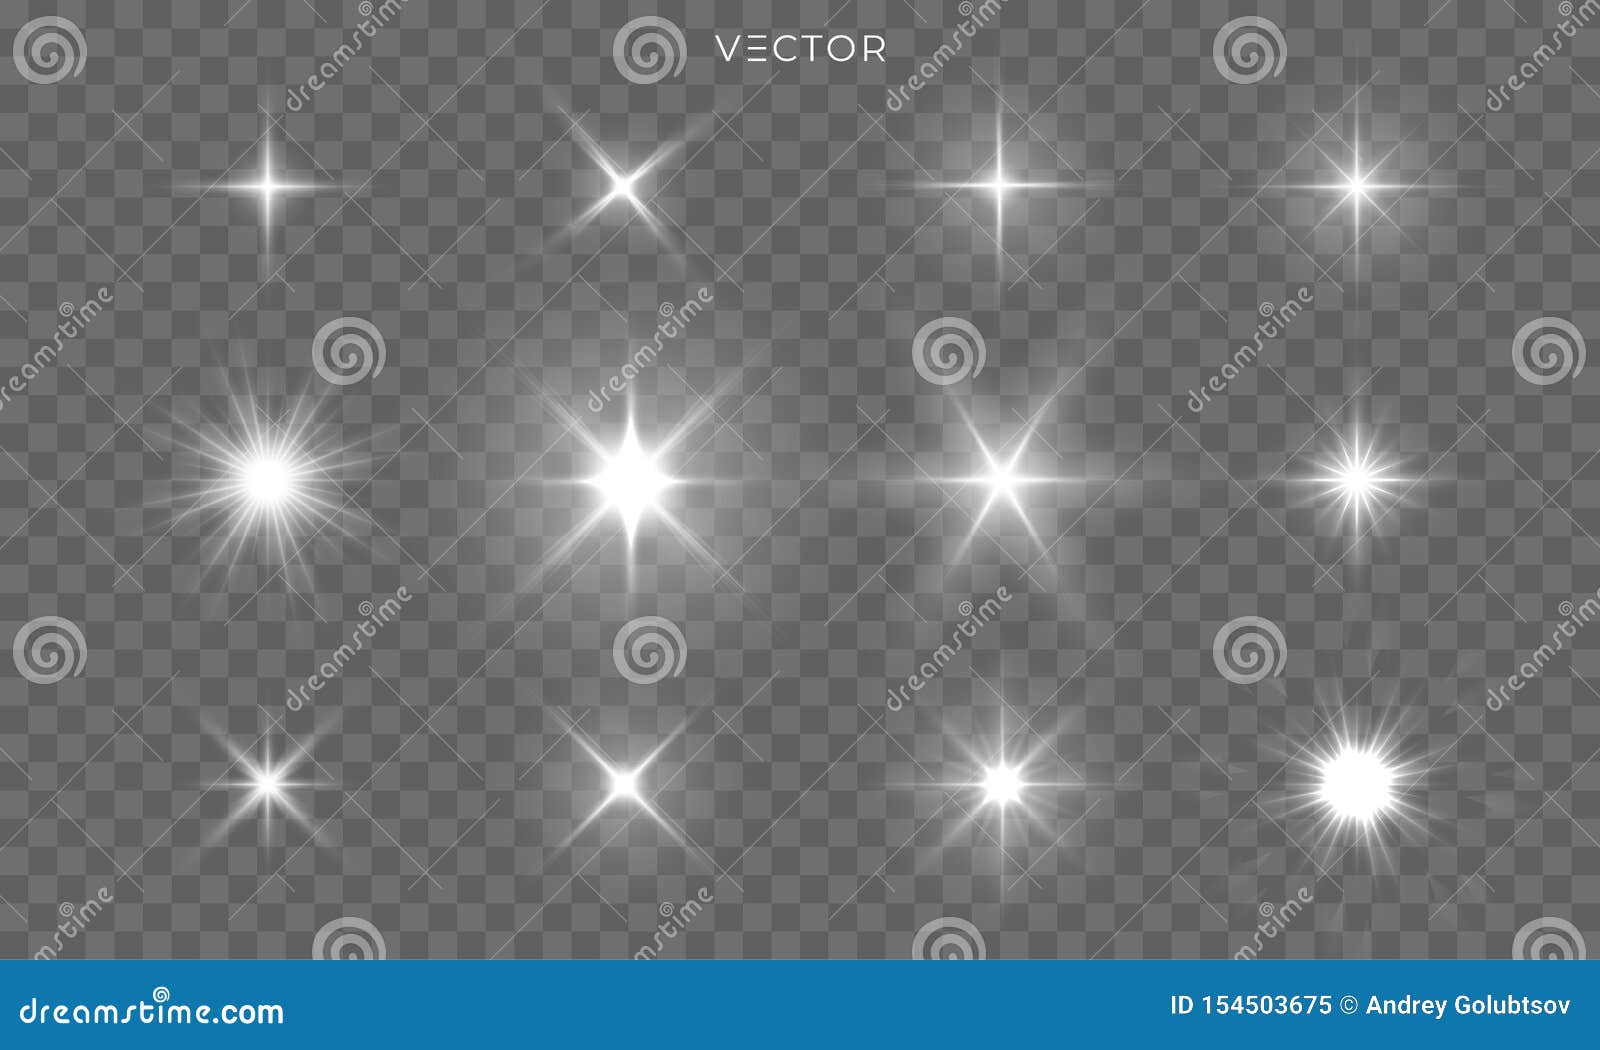 star shines and light glow sparks,  bright flare sparkles. star flash effect on transparent background,  sun